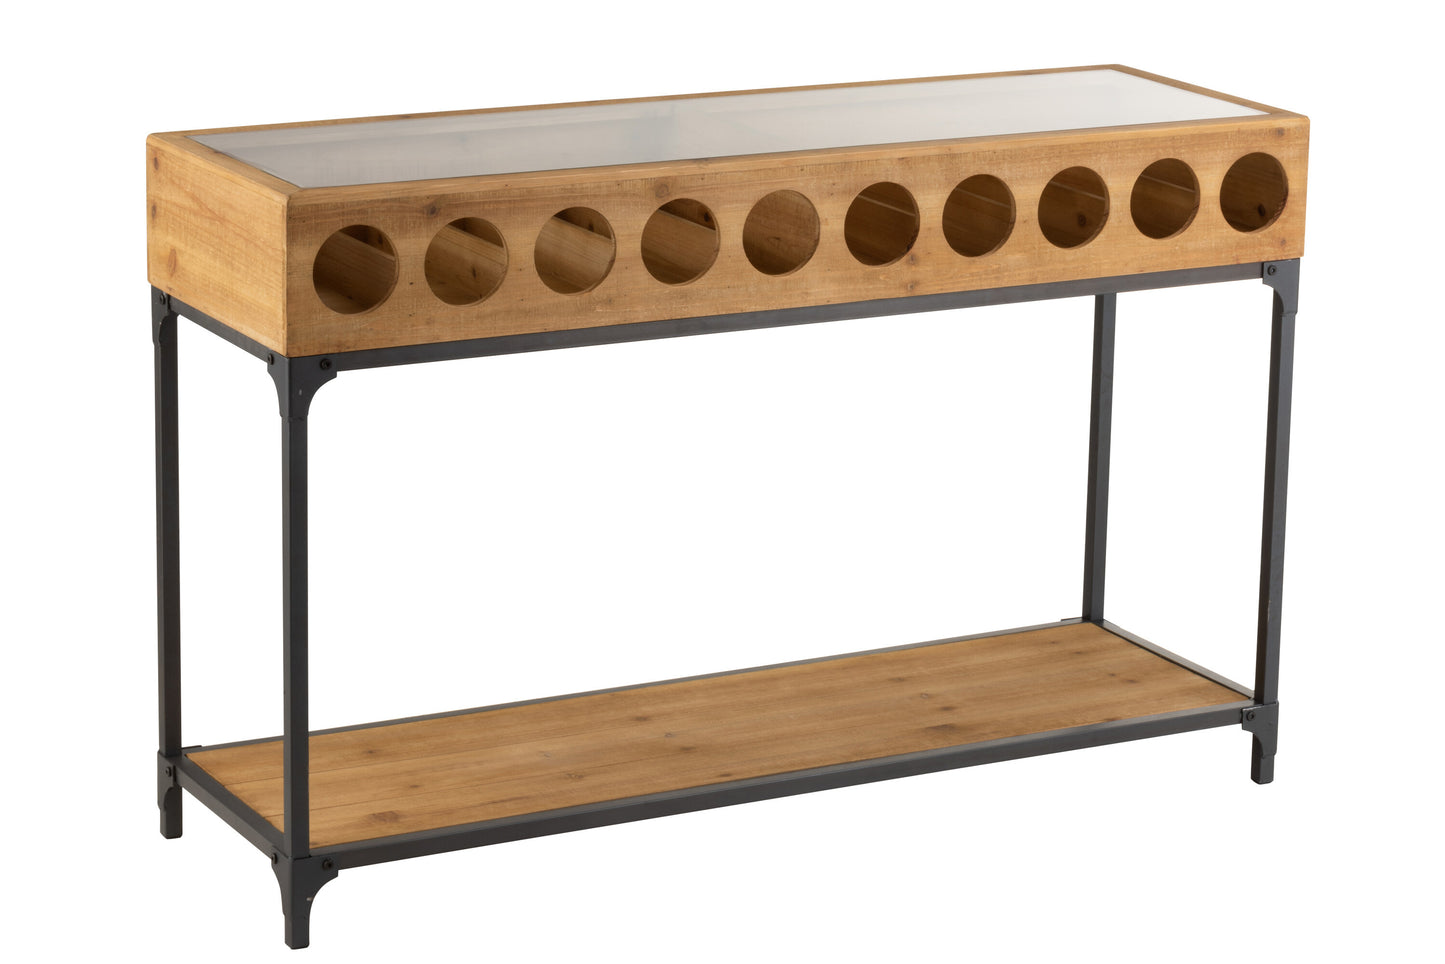 CONSOLE FOR WINE BOTTLES WOOD NATURAL